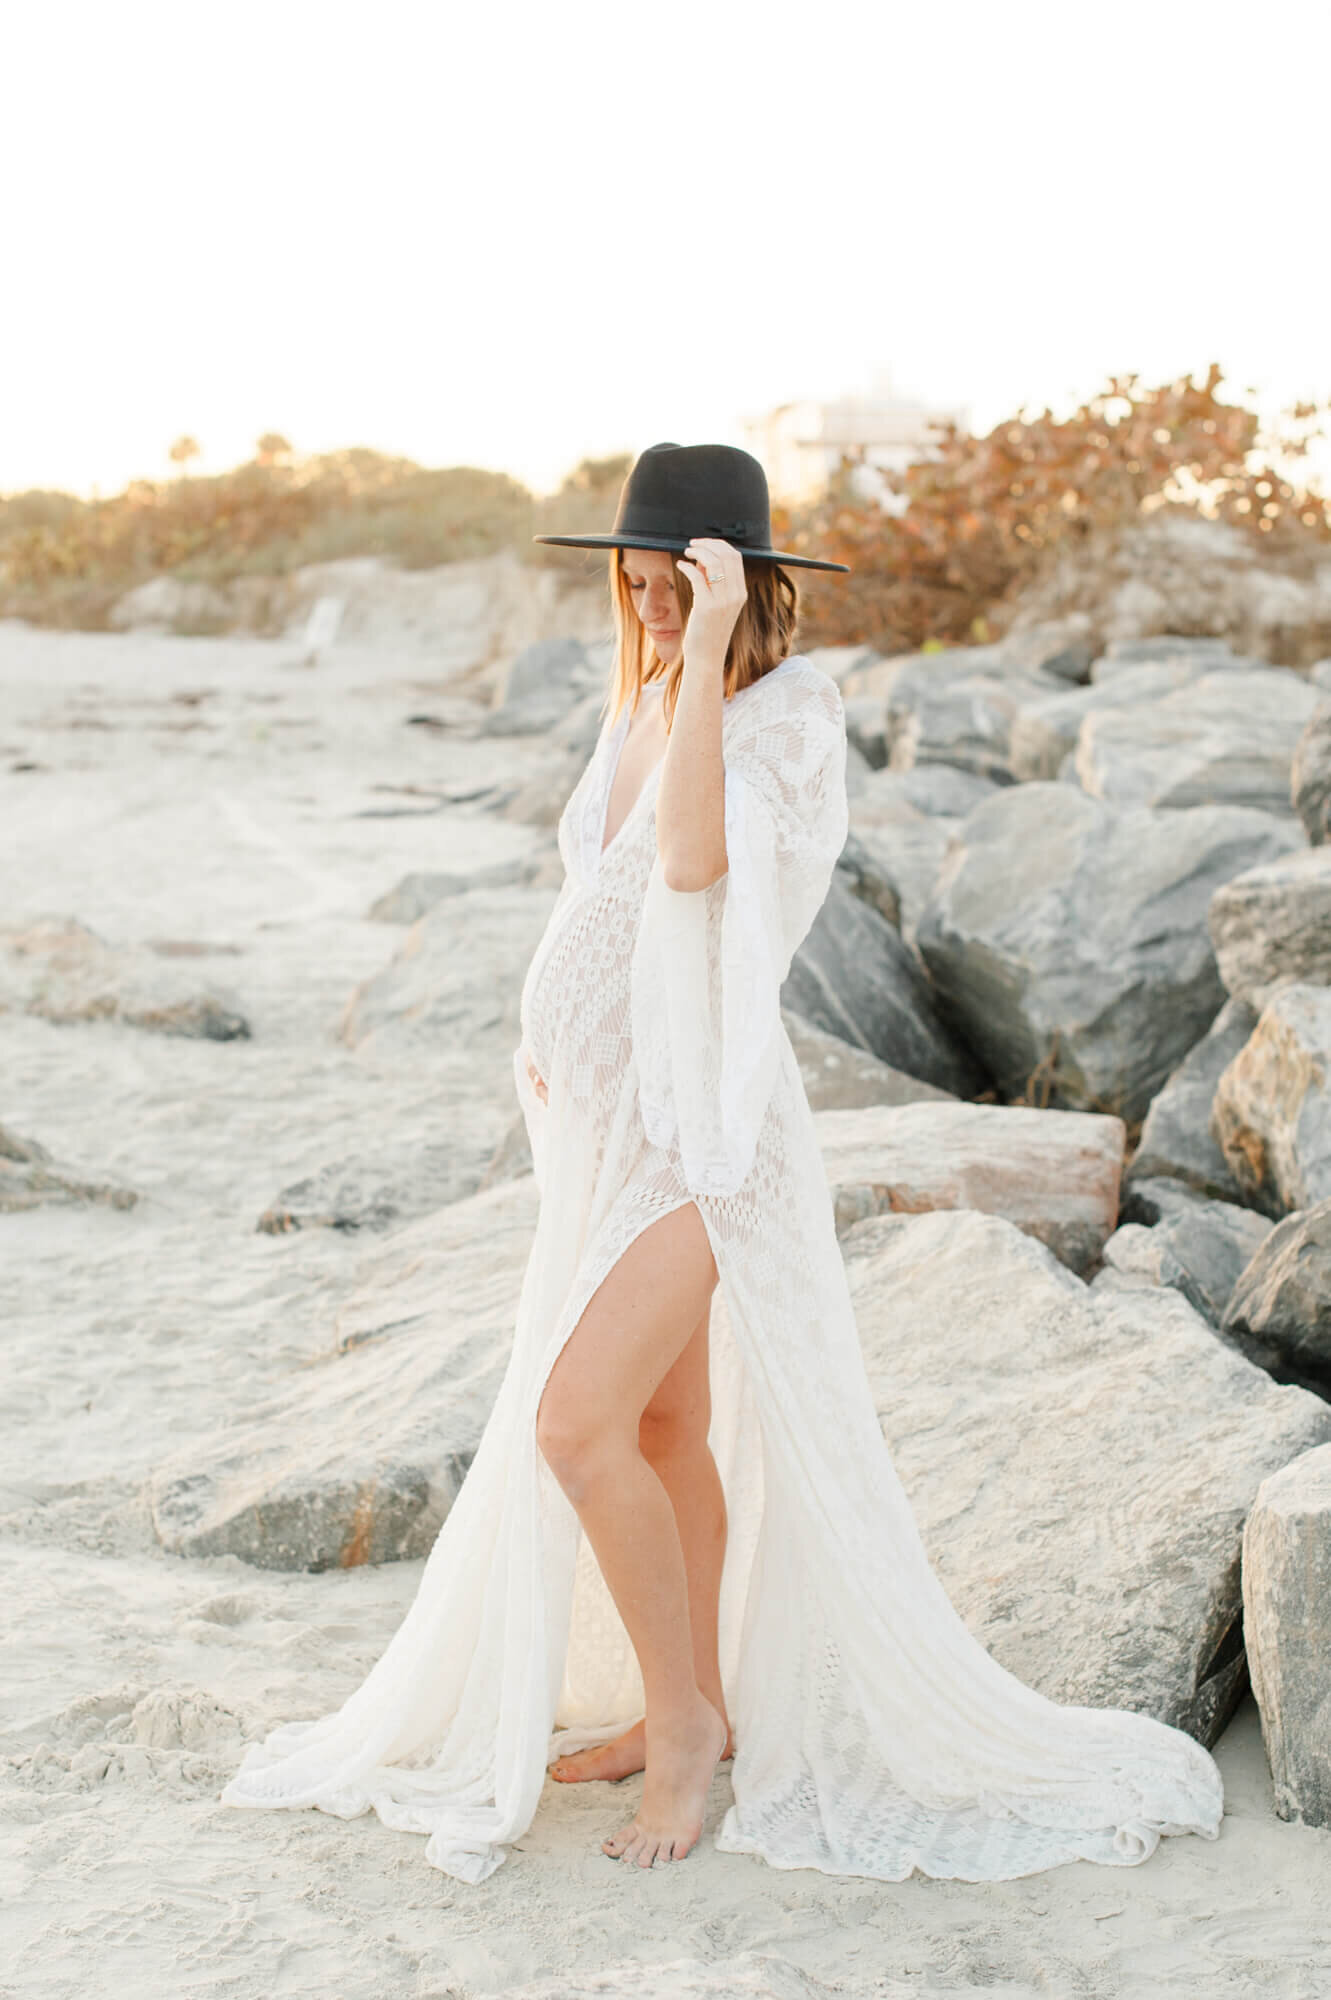 Pregnant mother stands near rocks on the beach holding her belly wearing a white lace gown